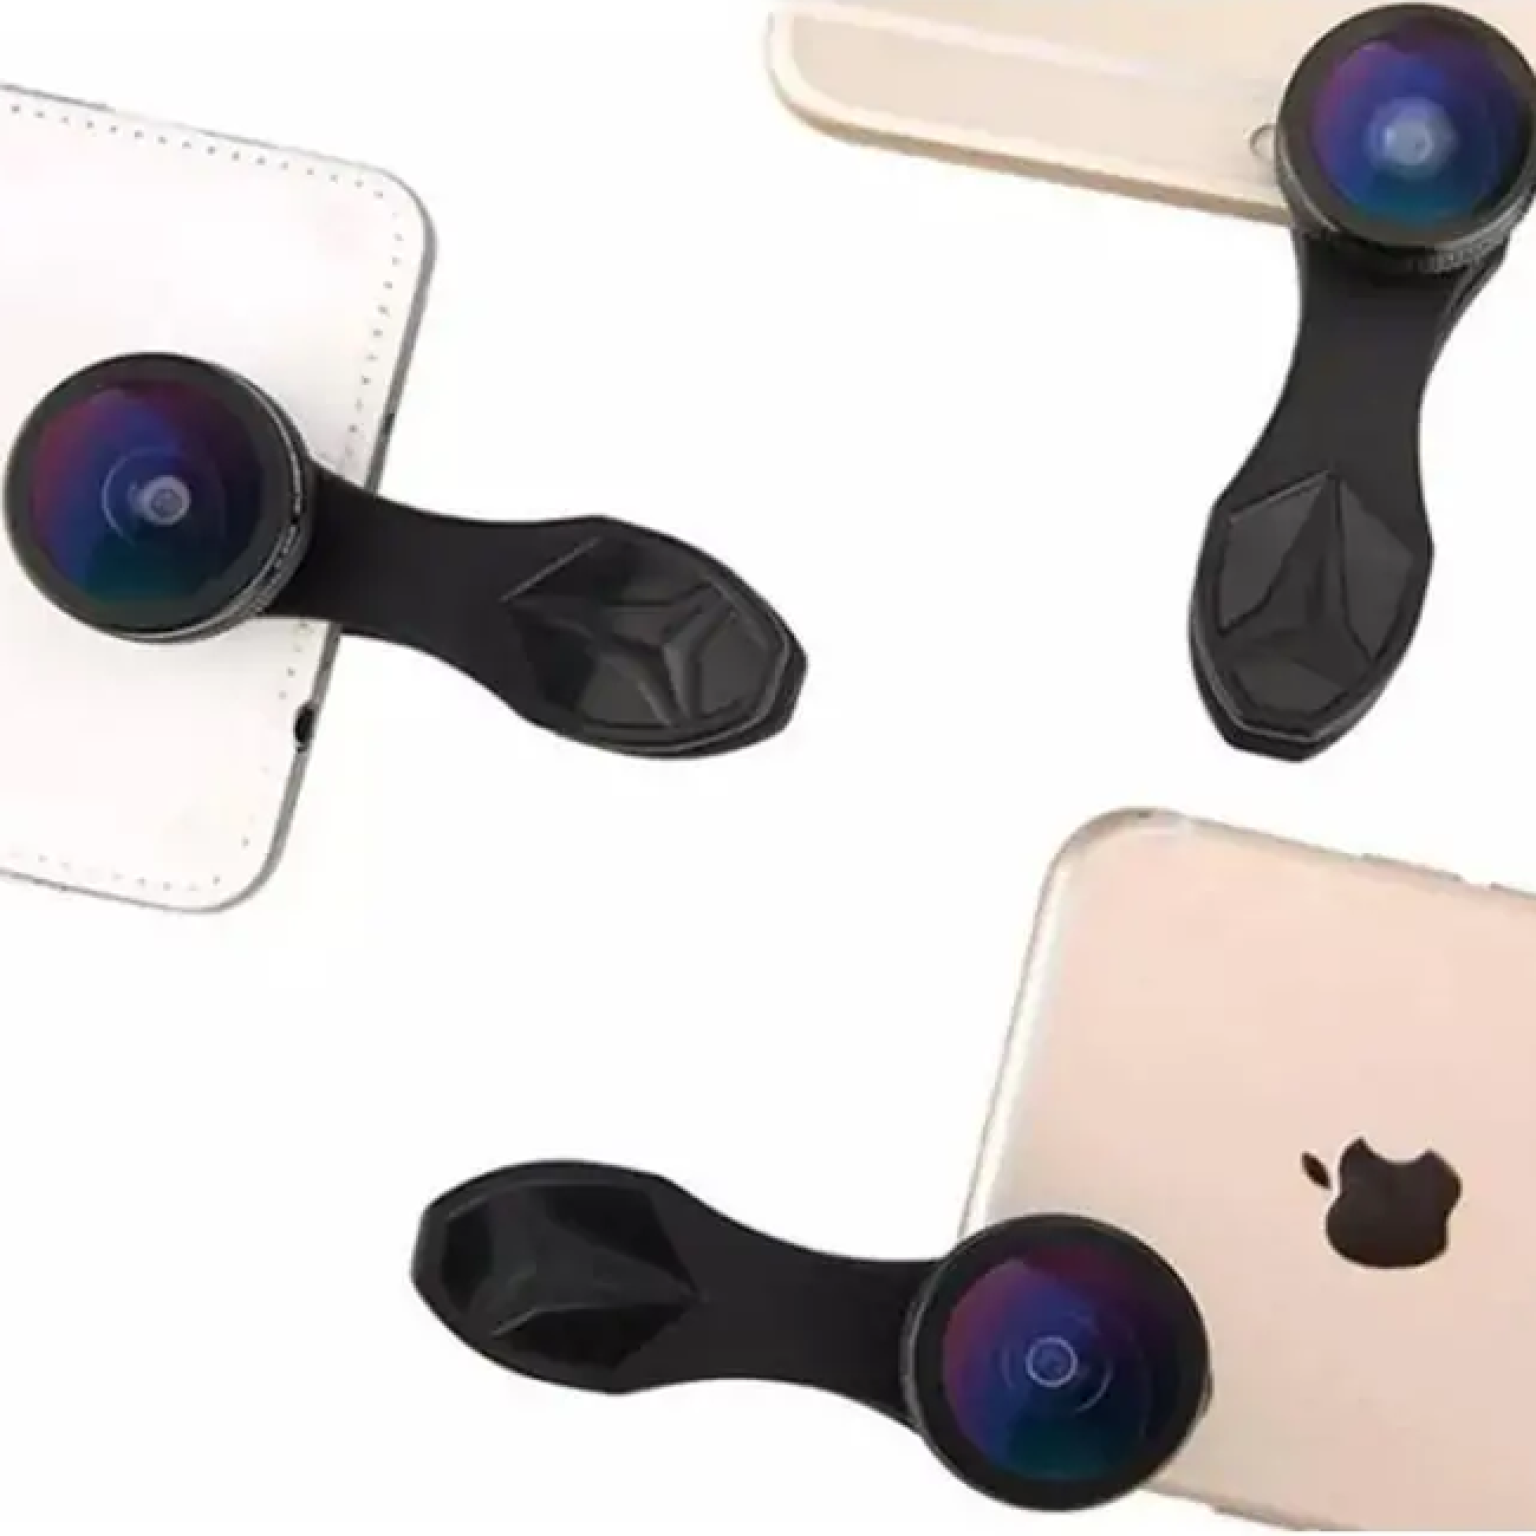 IBOOLO 5 in 1 Lens Kit 1